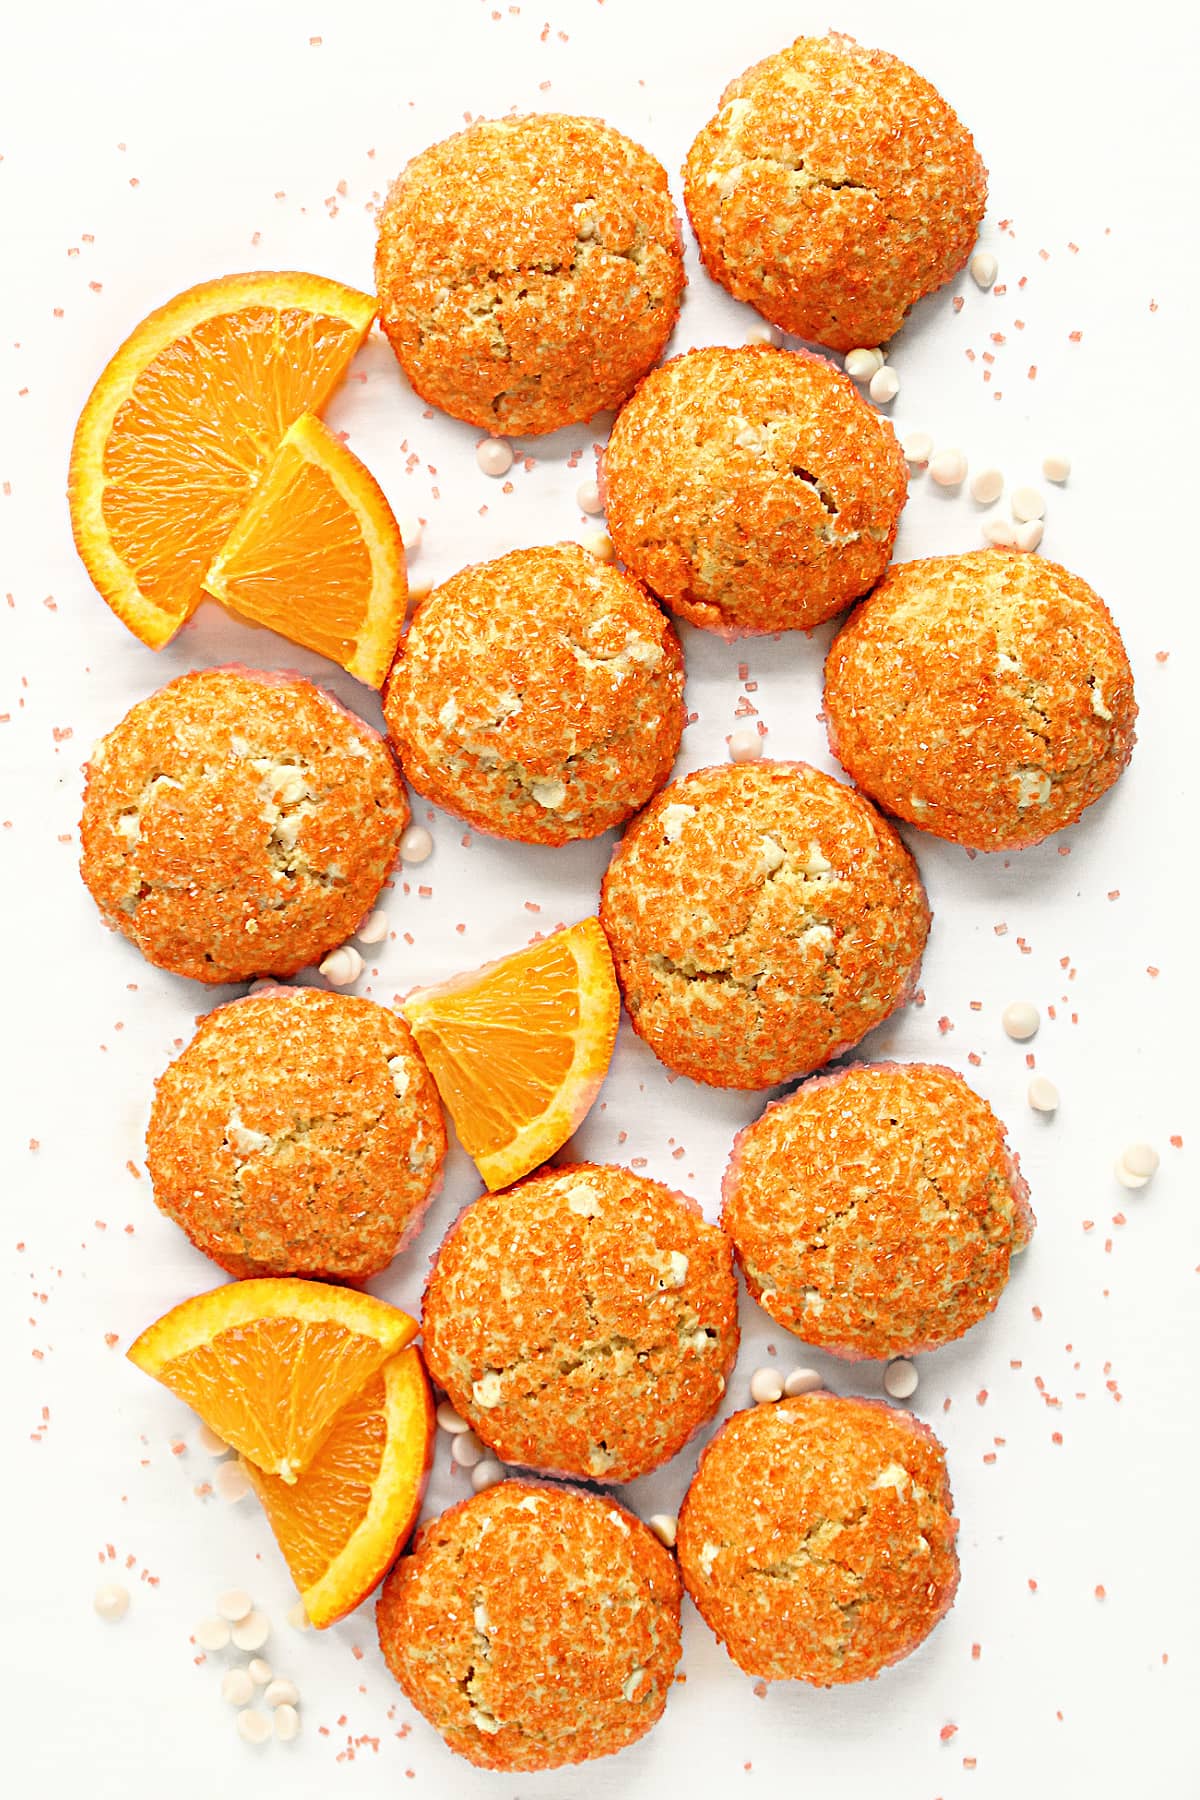 Cookies covered in orange sugar on a white background with orange slices, sugar, and white  chips.